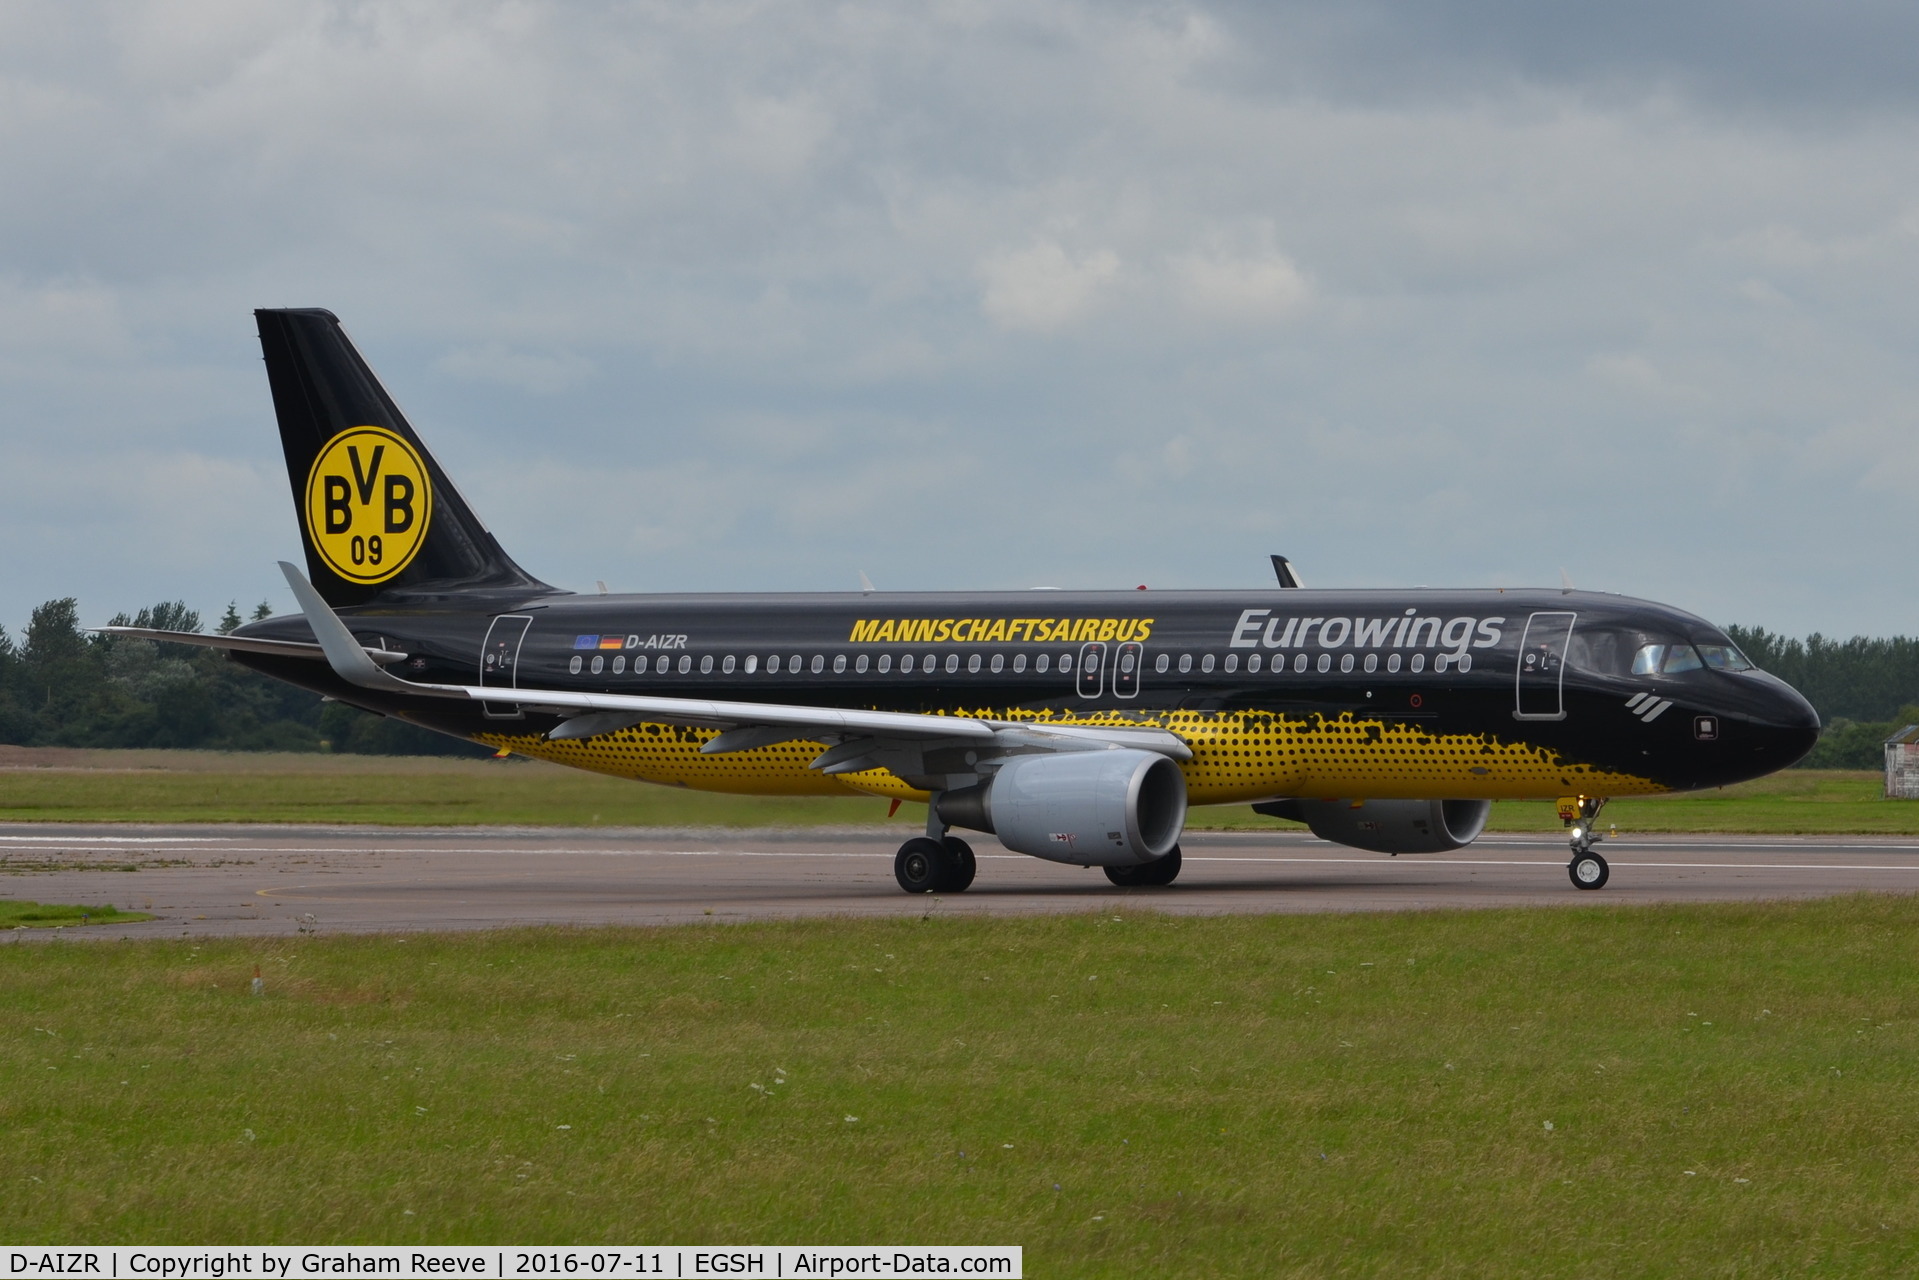 D-AIZR, 2013 Airbus A320-214 C/N 5525, Departing from Norwich in a new colour scheme.